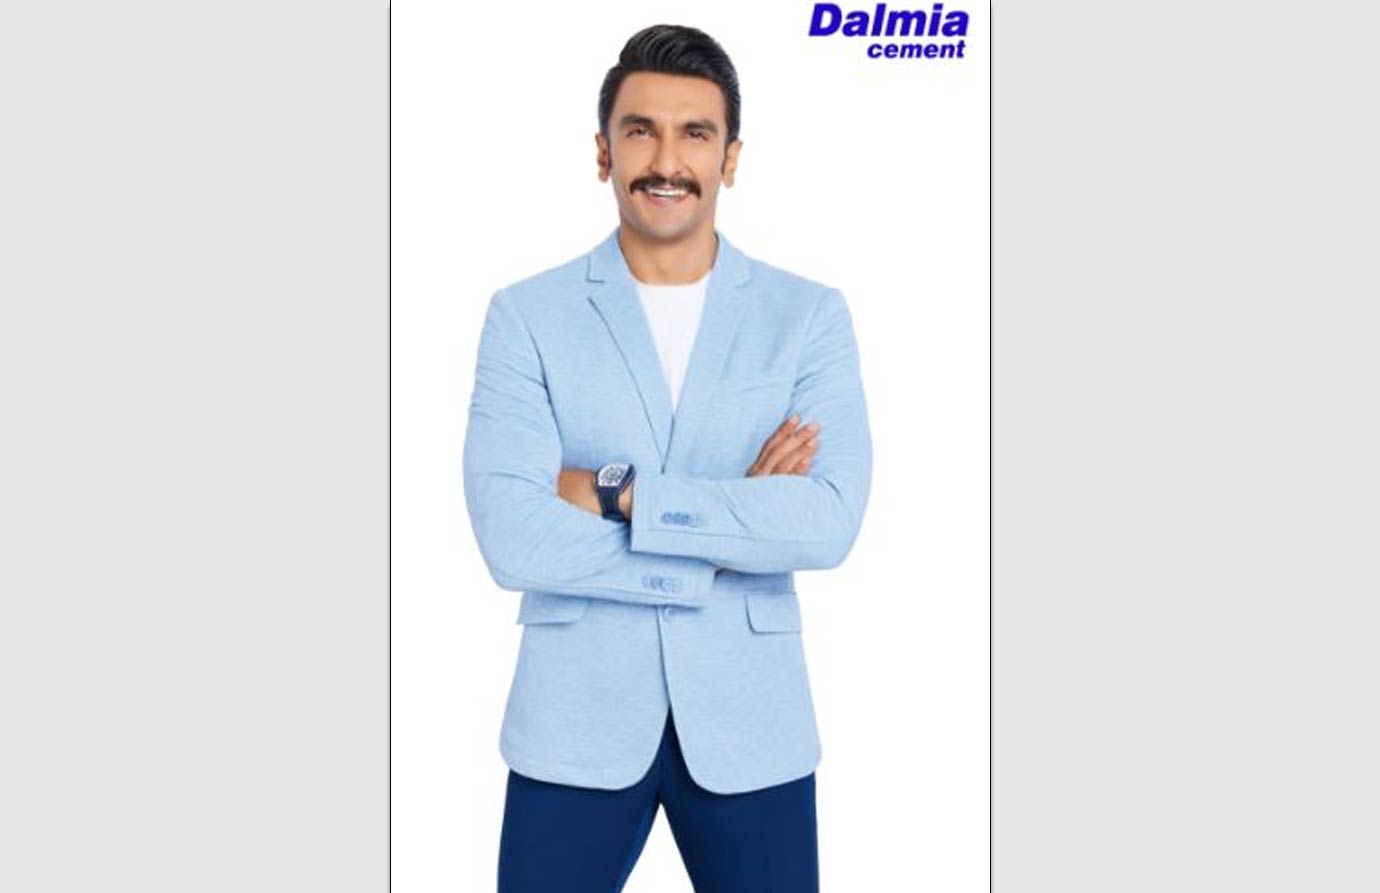 Dalmia Cement Elevates its Commitment to Home Builders with a Bold New Brand Positioning as the Roof Column Foundation (RCF) Expert, Onboards Superstar Ranveer Singh as the Brand Ambassador